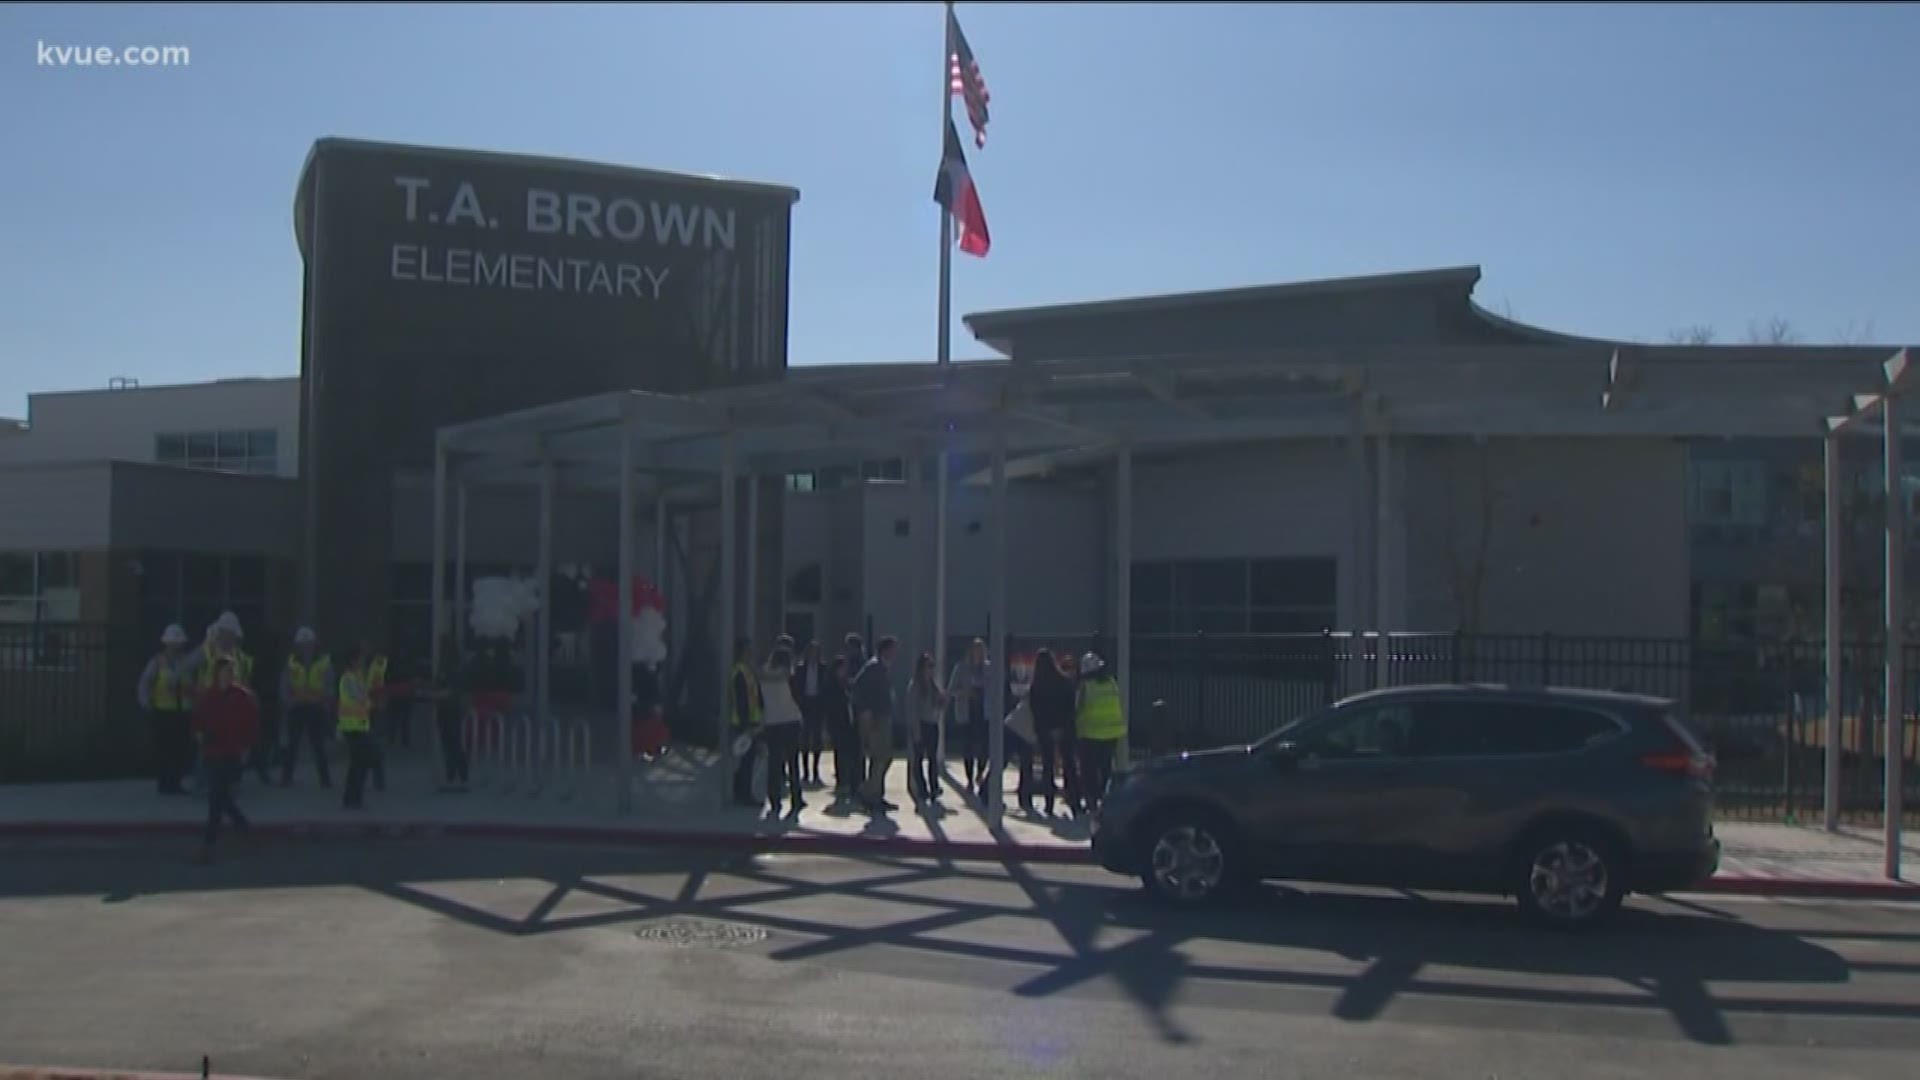 T.A. Brown Elementary is back open after being deemed unsafe back in 2016.